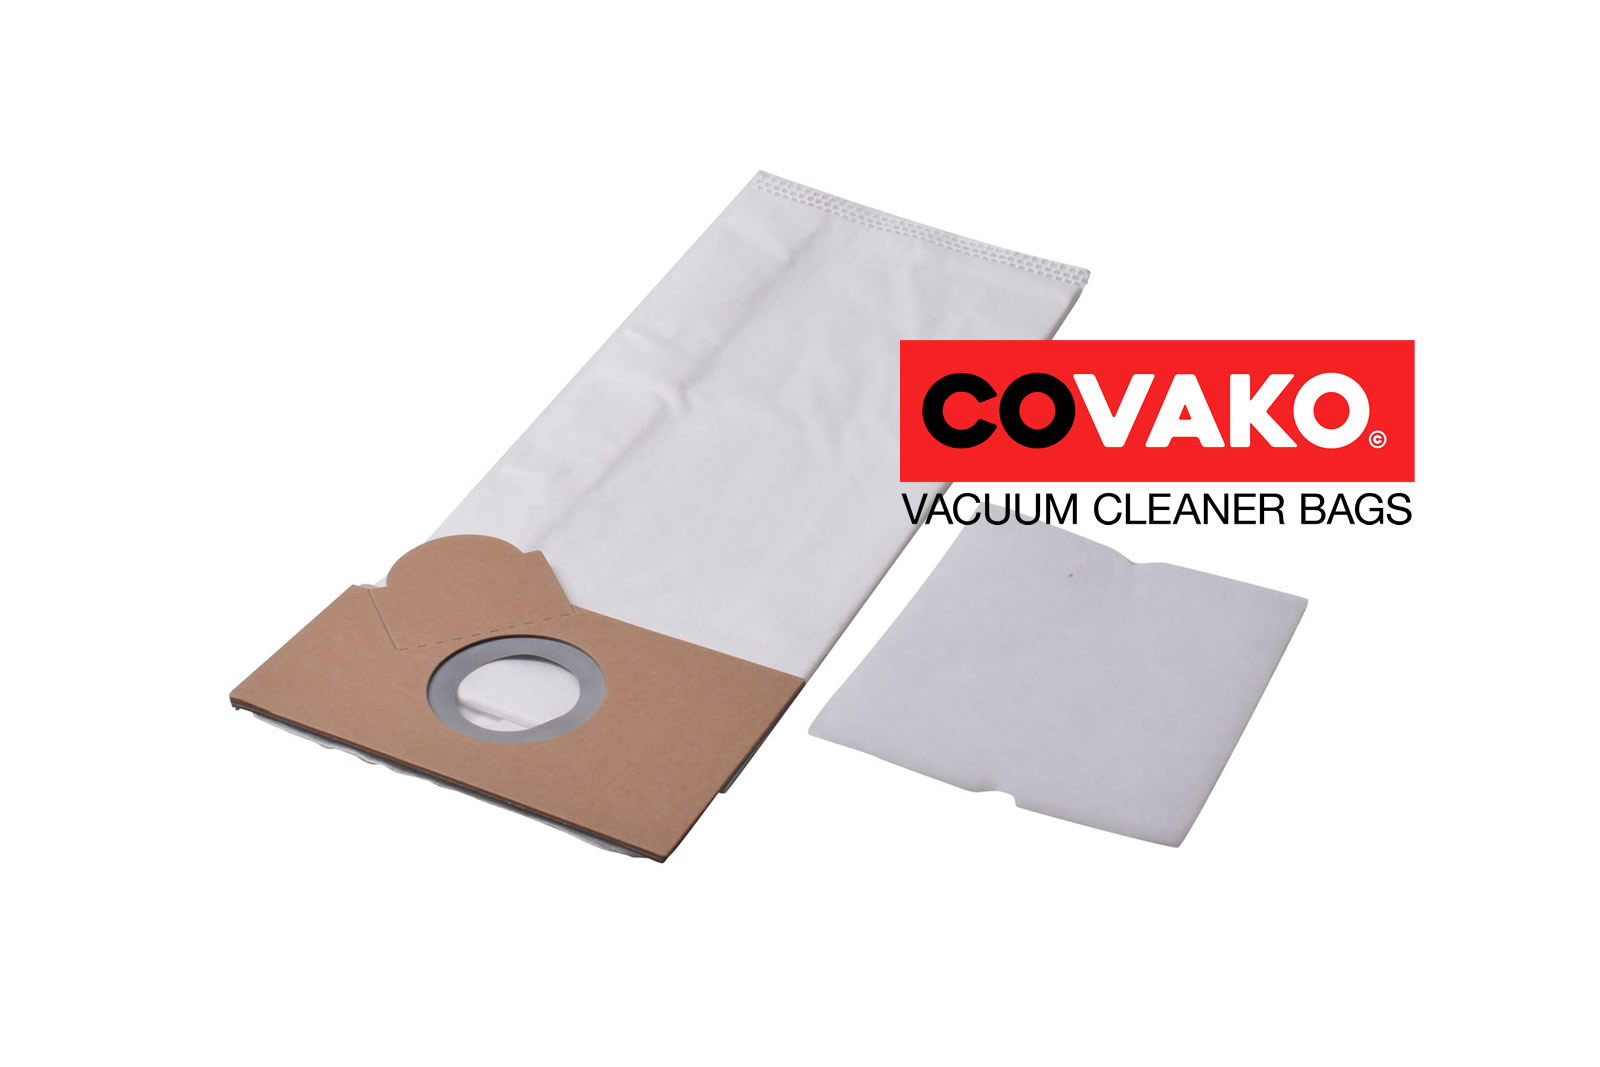 Fakir RS 05 / Synthesis - Fakir vacuum cleaner bags